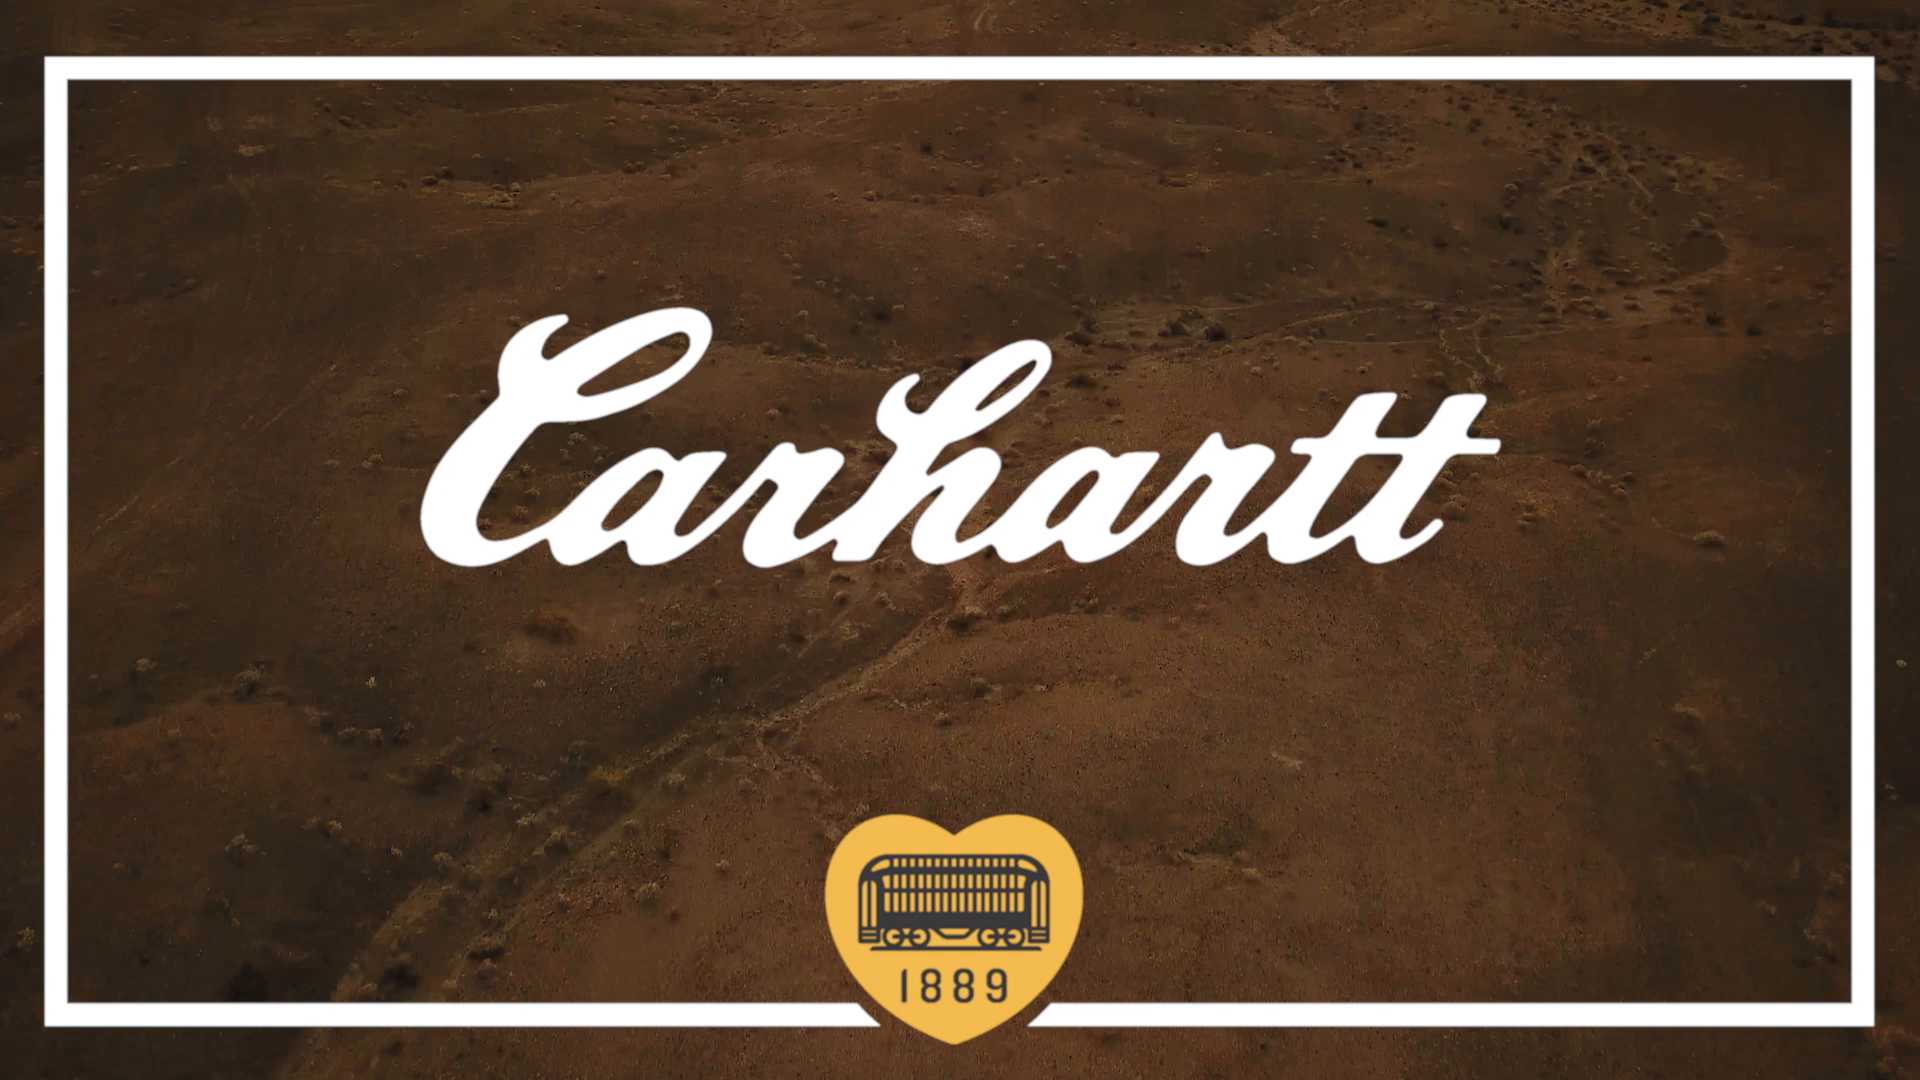 Carhartt  Made for Dads Not Dads Day  You can buy Dad Carhartt for  Fathers Day but all he wants you to spend is time  By Carhartt  Facebook